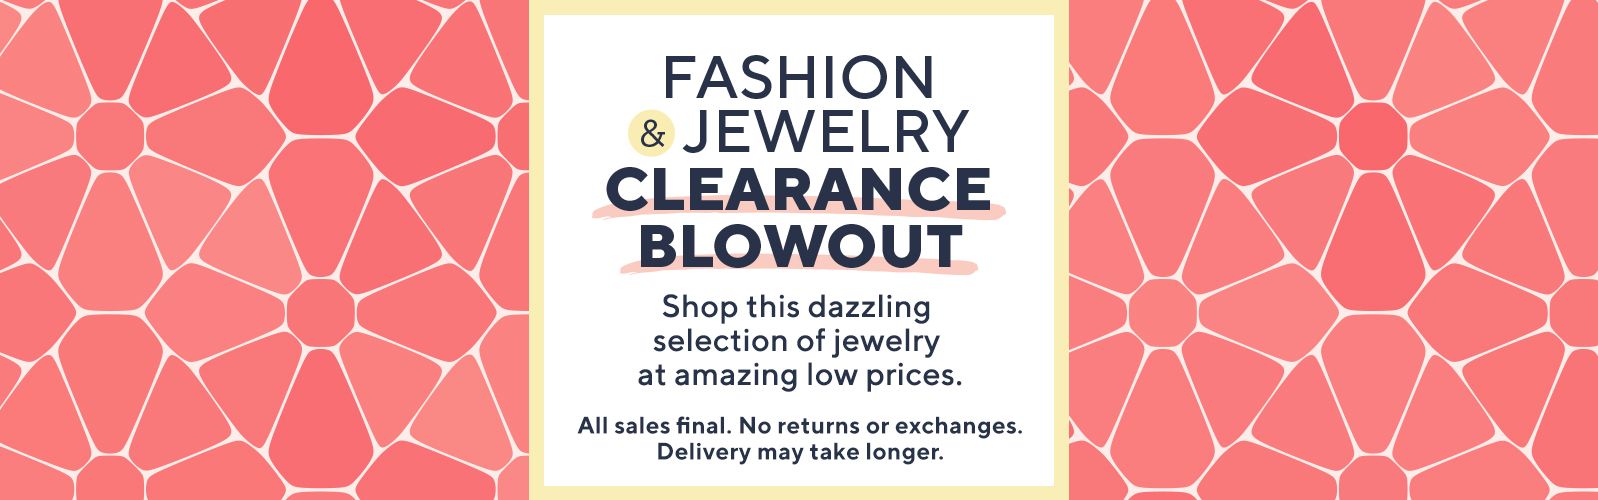 Fashion & Jewelry Clearance Blowout  - Shop this dazzling selection of jewelry at amazing low prices.   All sales final. No returns or exchanges. Delivery may take longer.